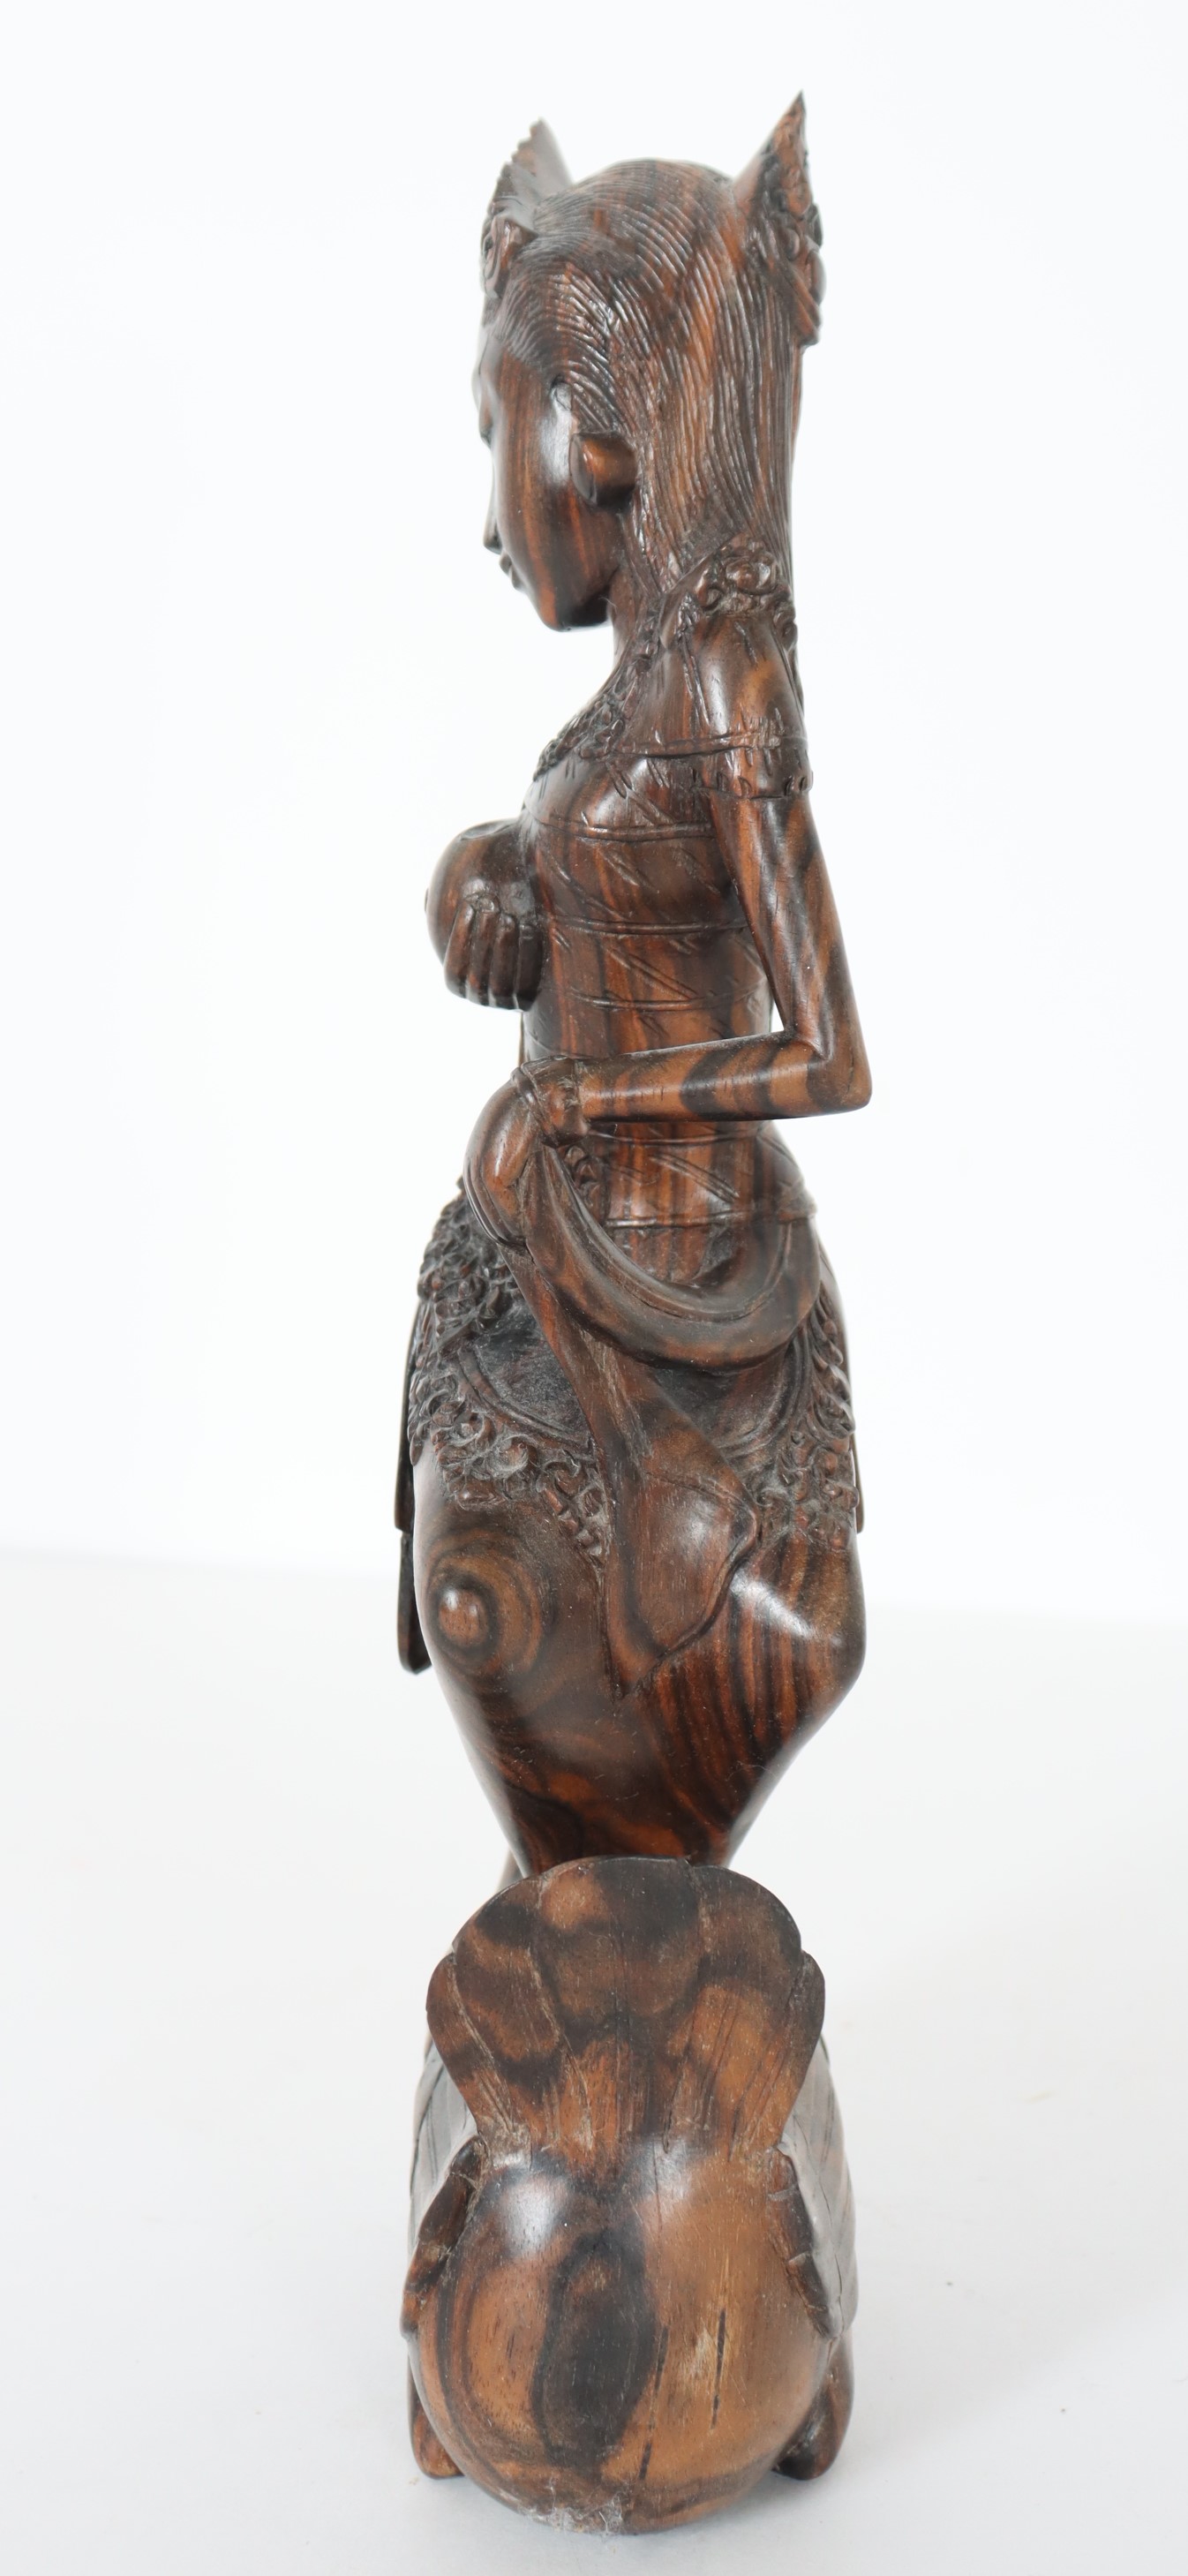 Balinese Wood Carving of Goddess w Swan - Image 4 of 4